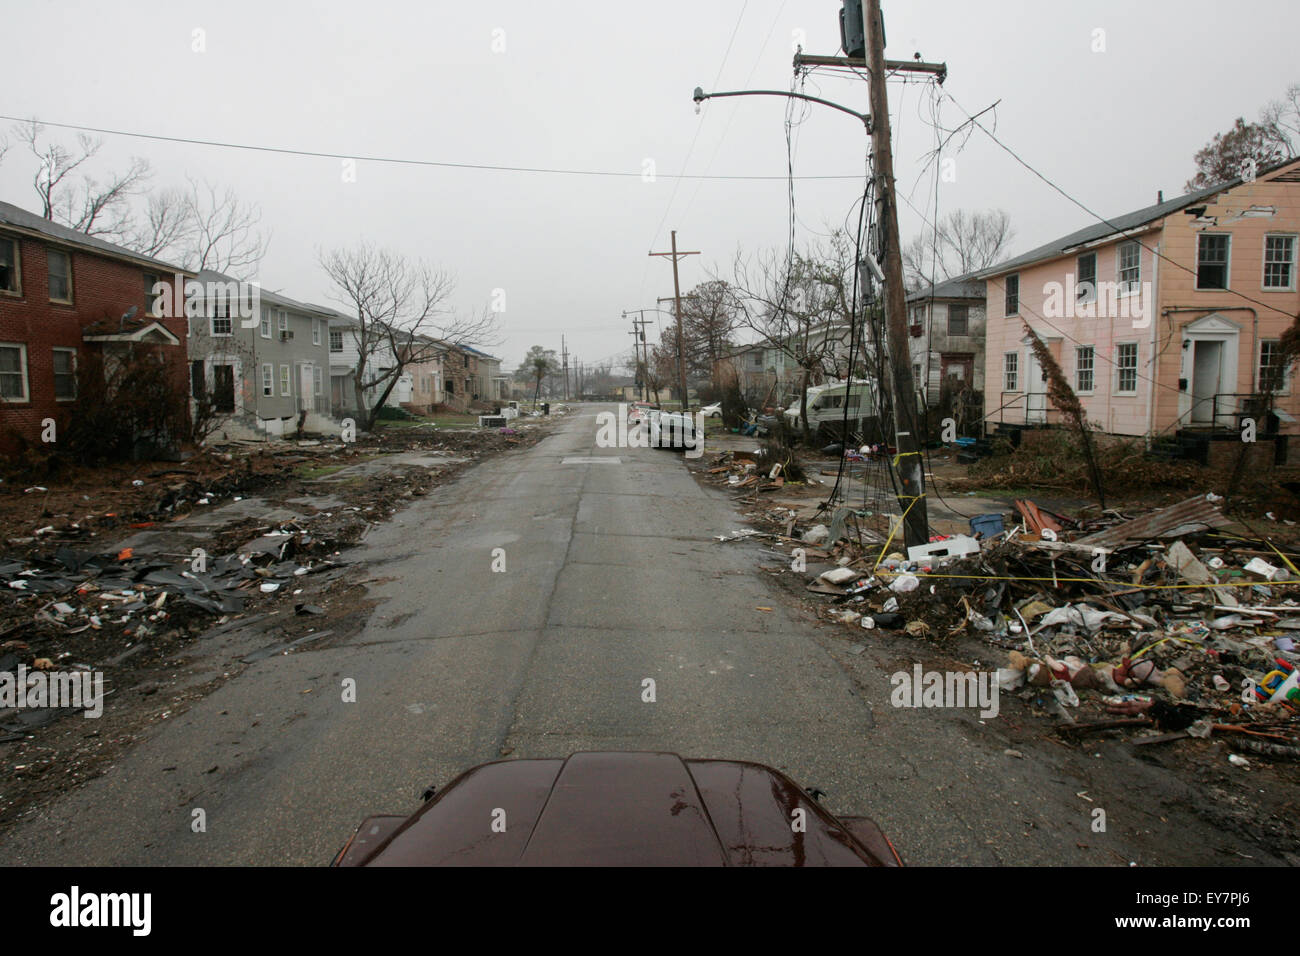 A view of a street in New Orleans in the aftermath of Hurricane Katrina. Stock Photo